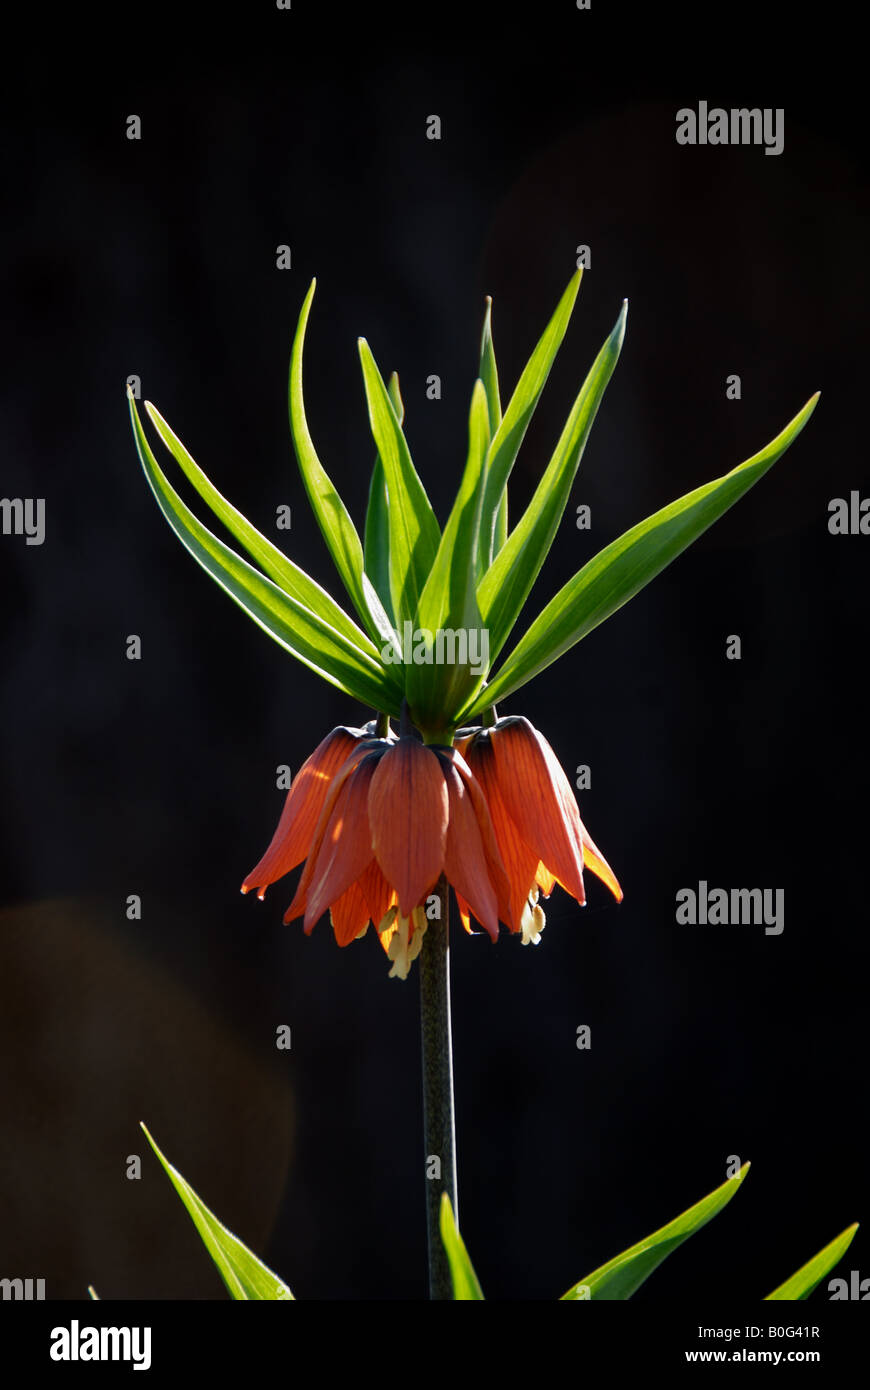 Fritillaria imperialis. This spring blooming perennial has a pungent skunk like odor. Also know as crown imperialis. Stock Photo